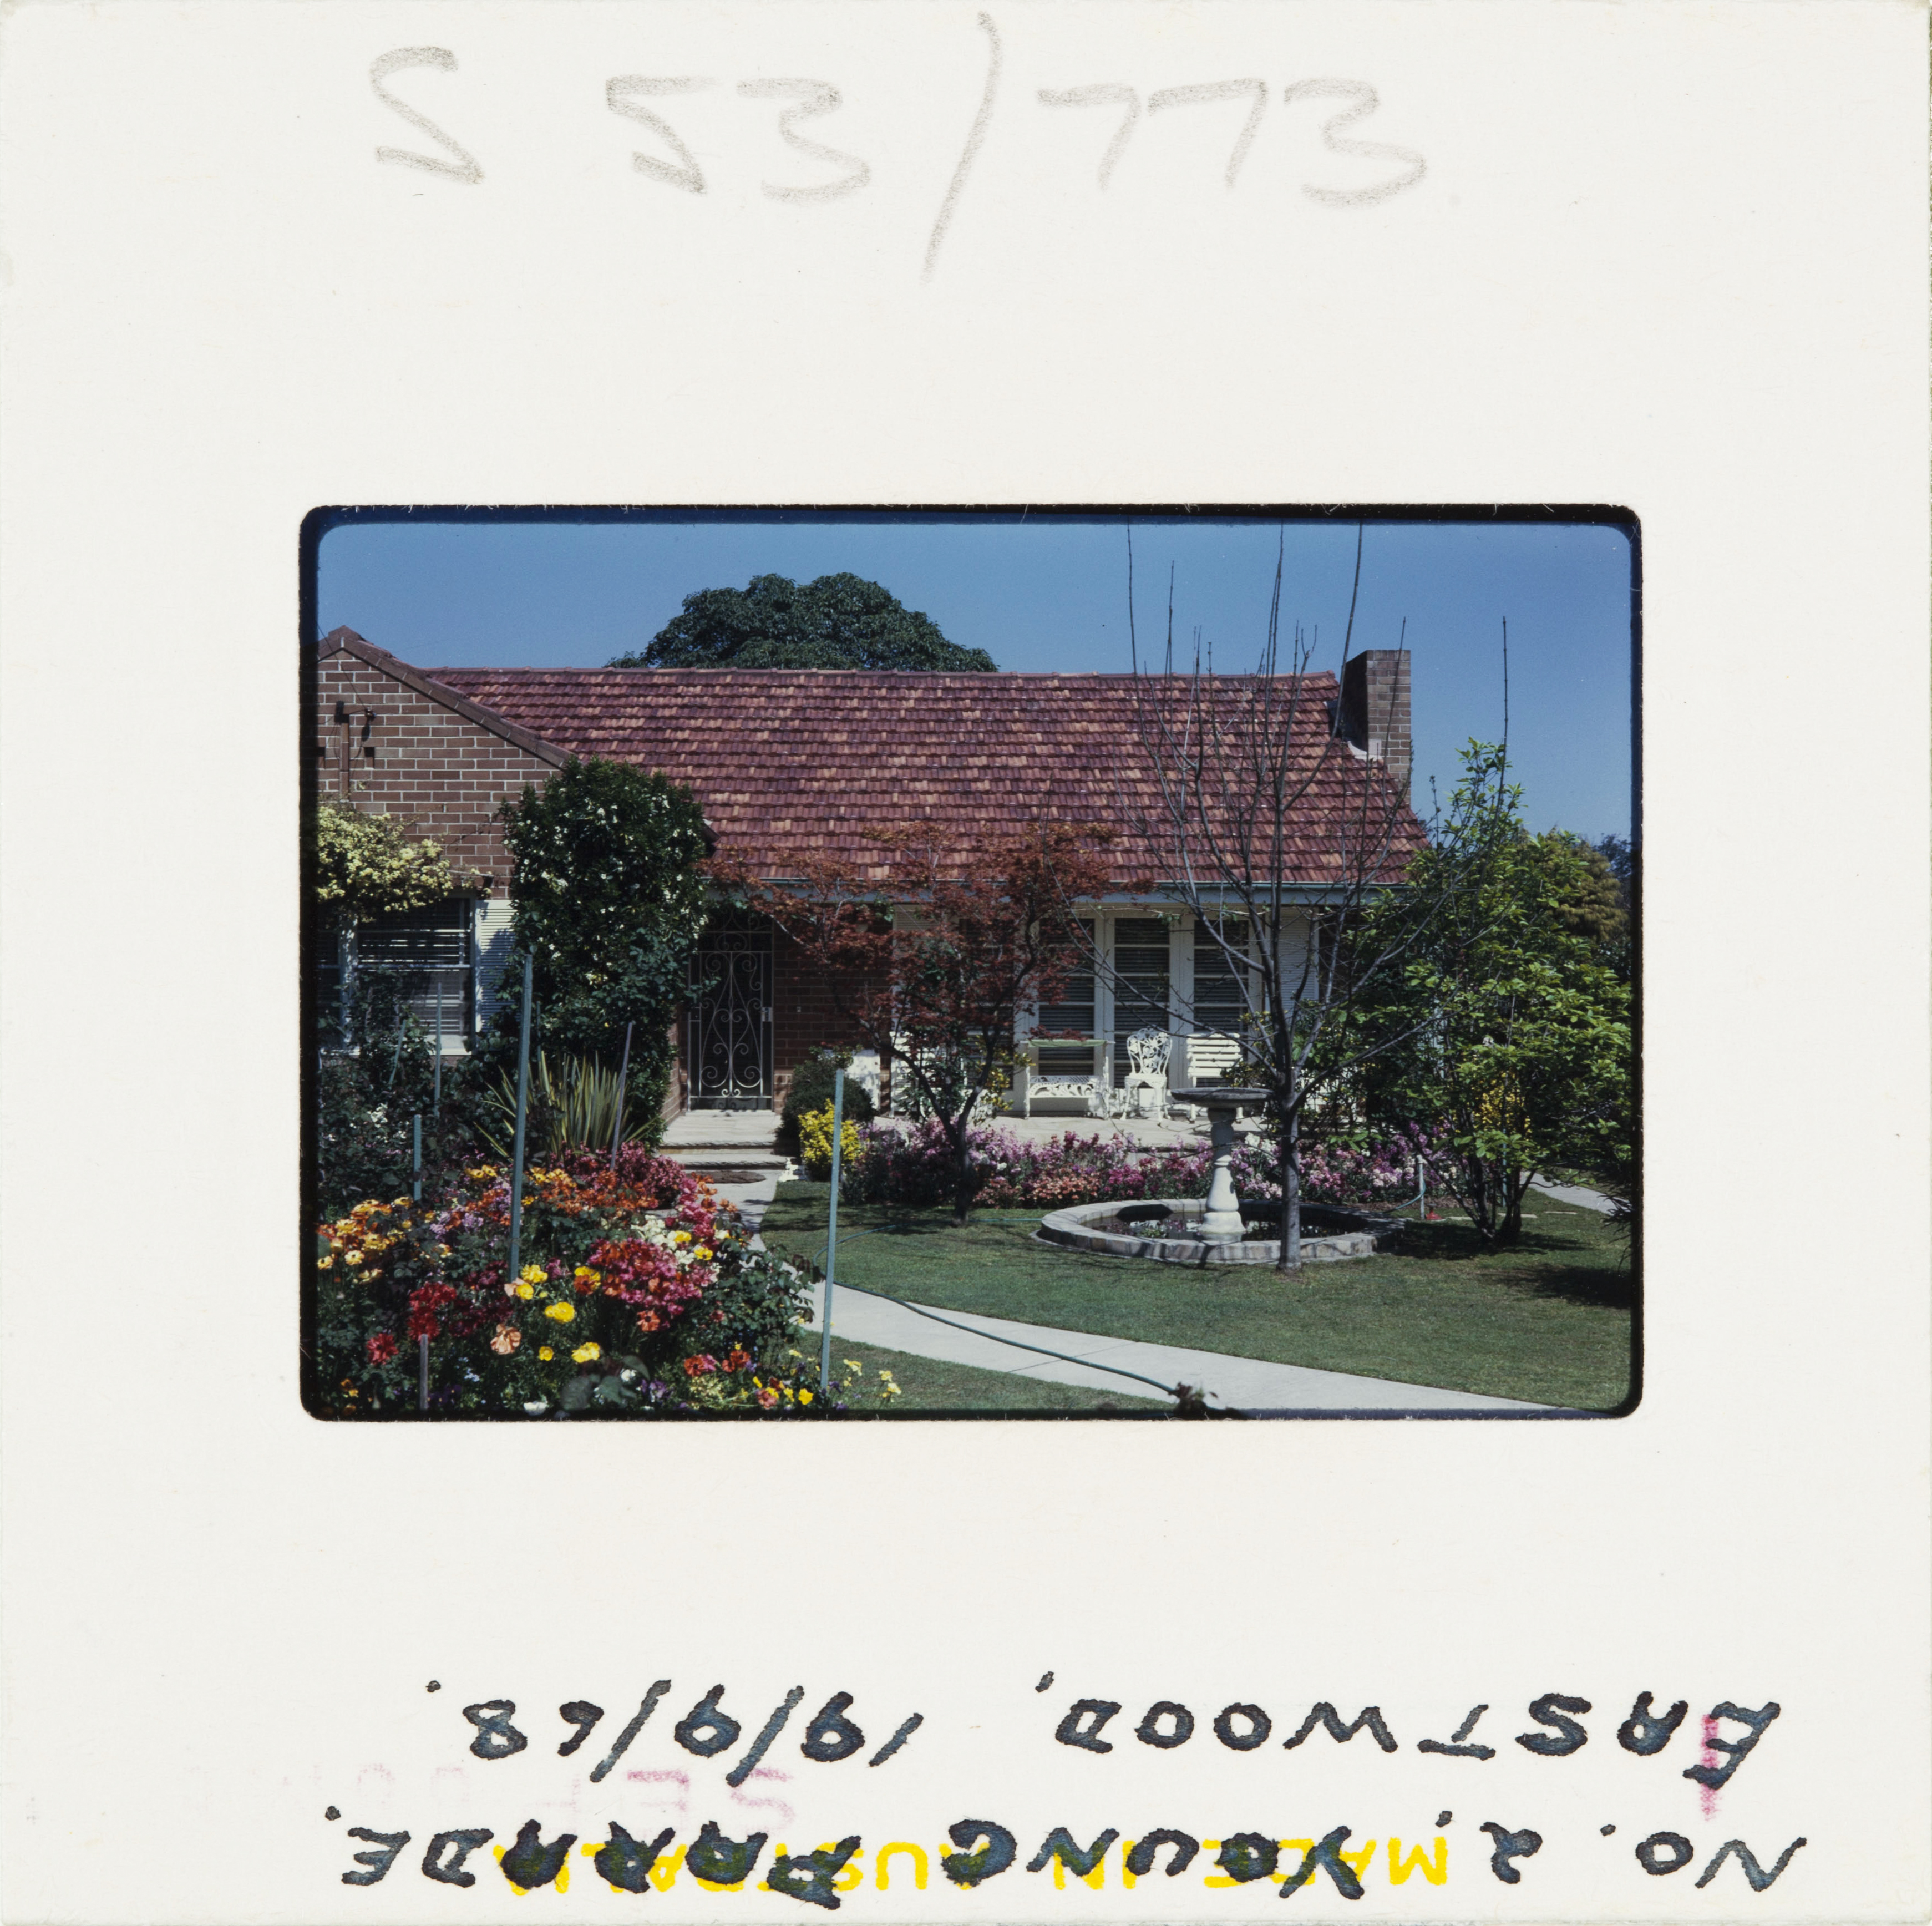 A 60s Kodak colour slide of a suburban brick home with colourful front garden in full flower.